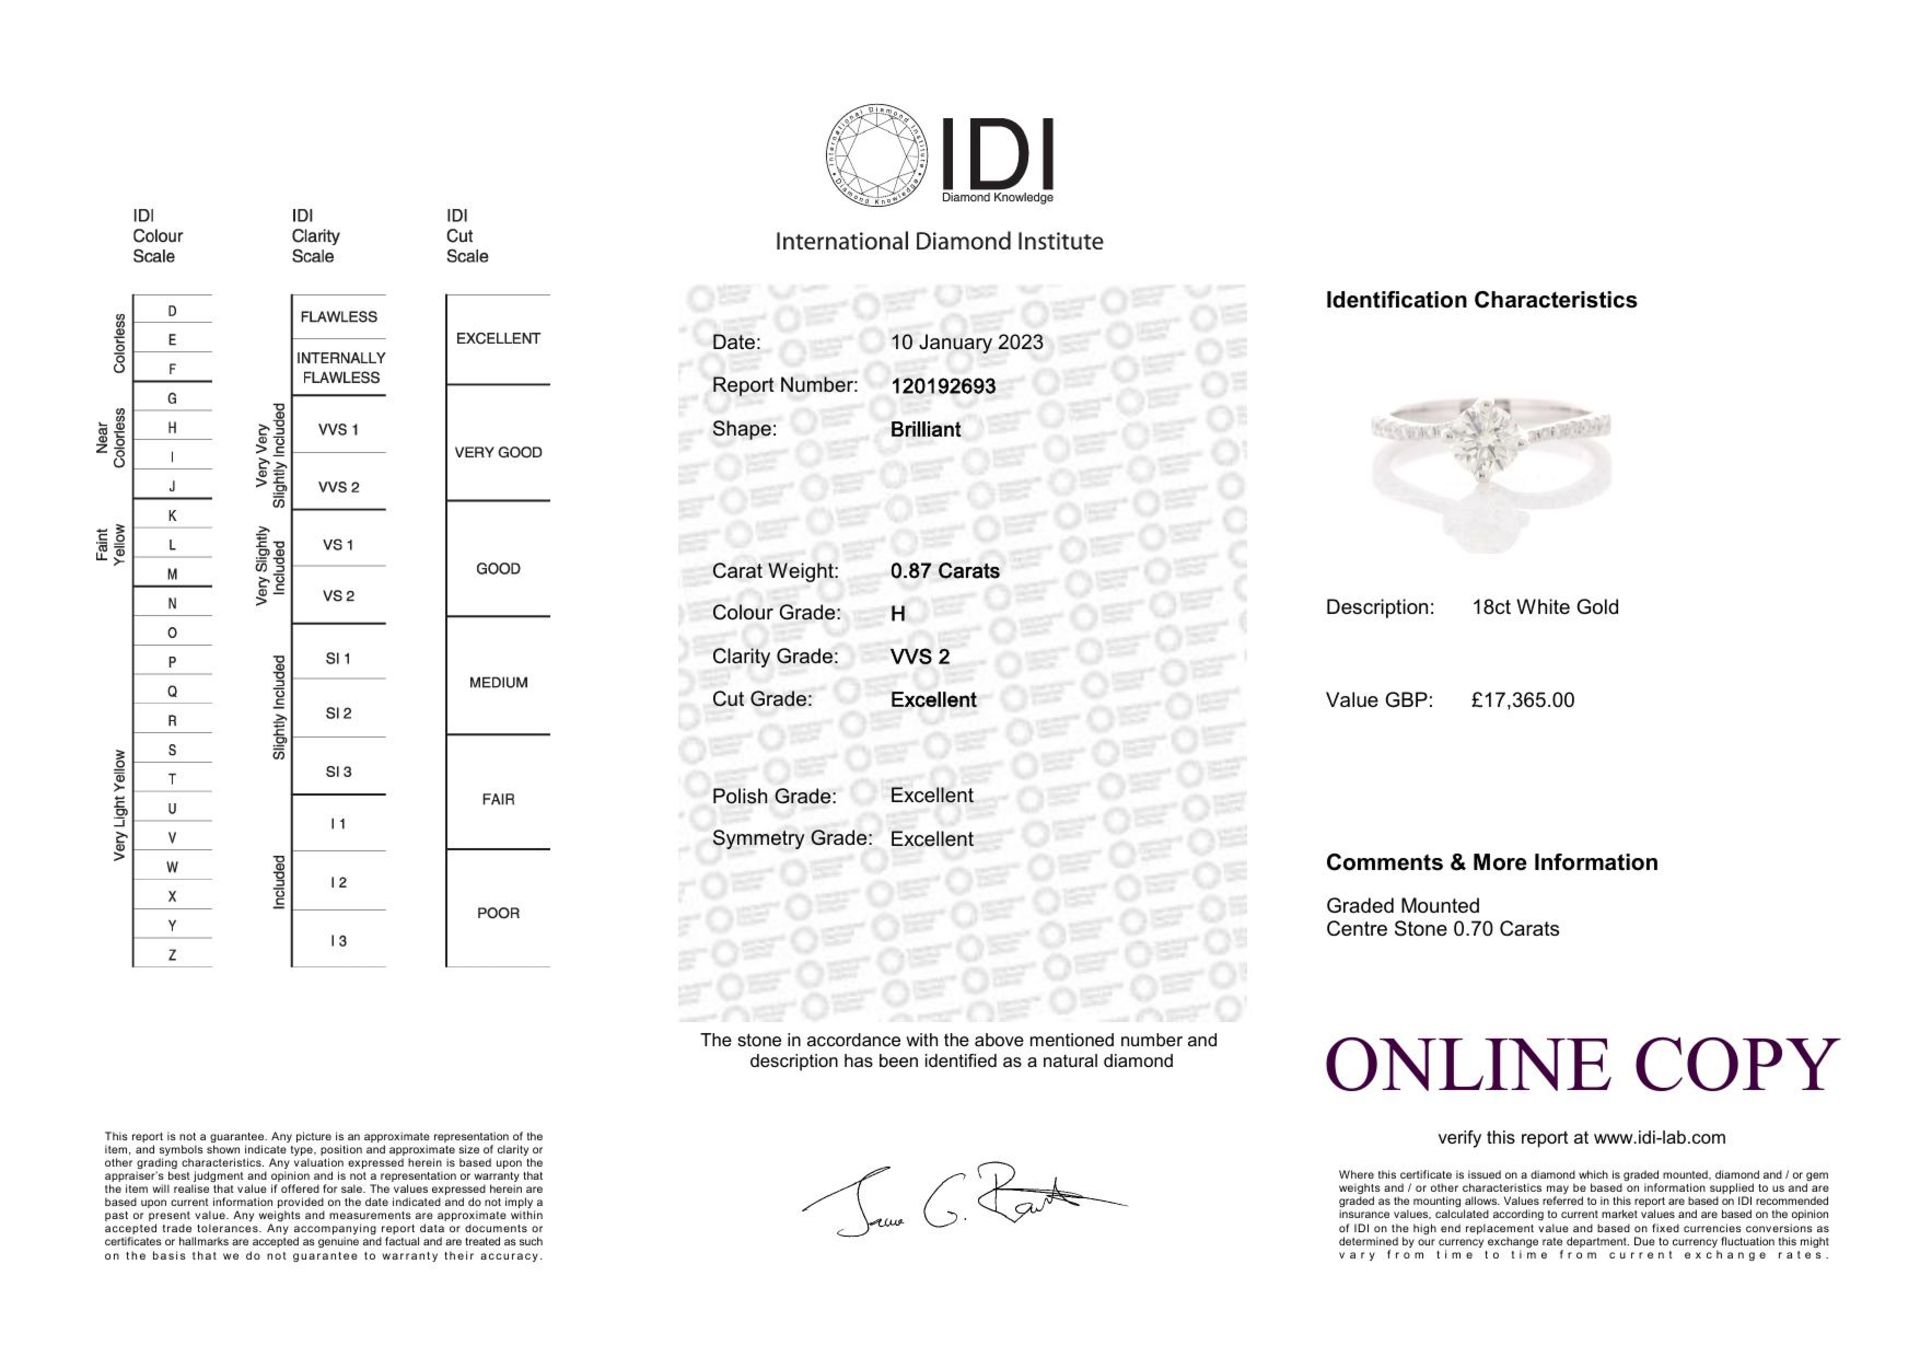 18ct White Gold Diamond Ring With Stone Set Shoulders 0.87 Carats - Valued By IDI £17,365.00 - A - Image 5 of 5